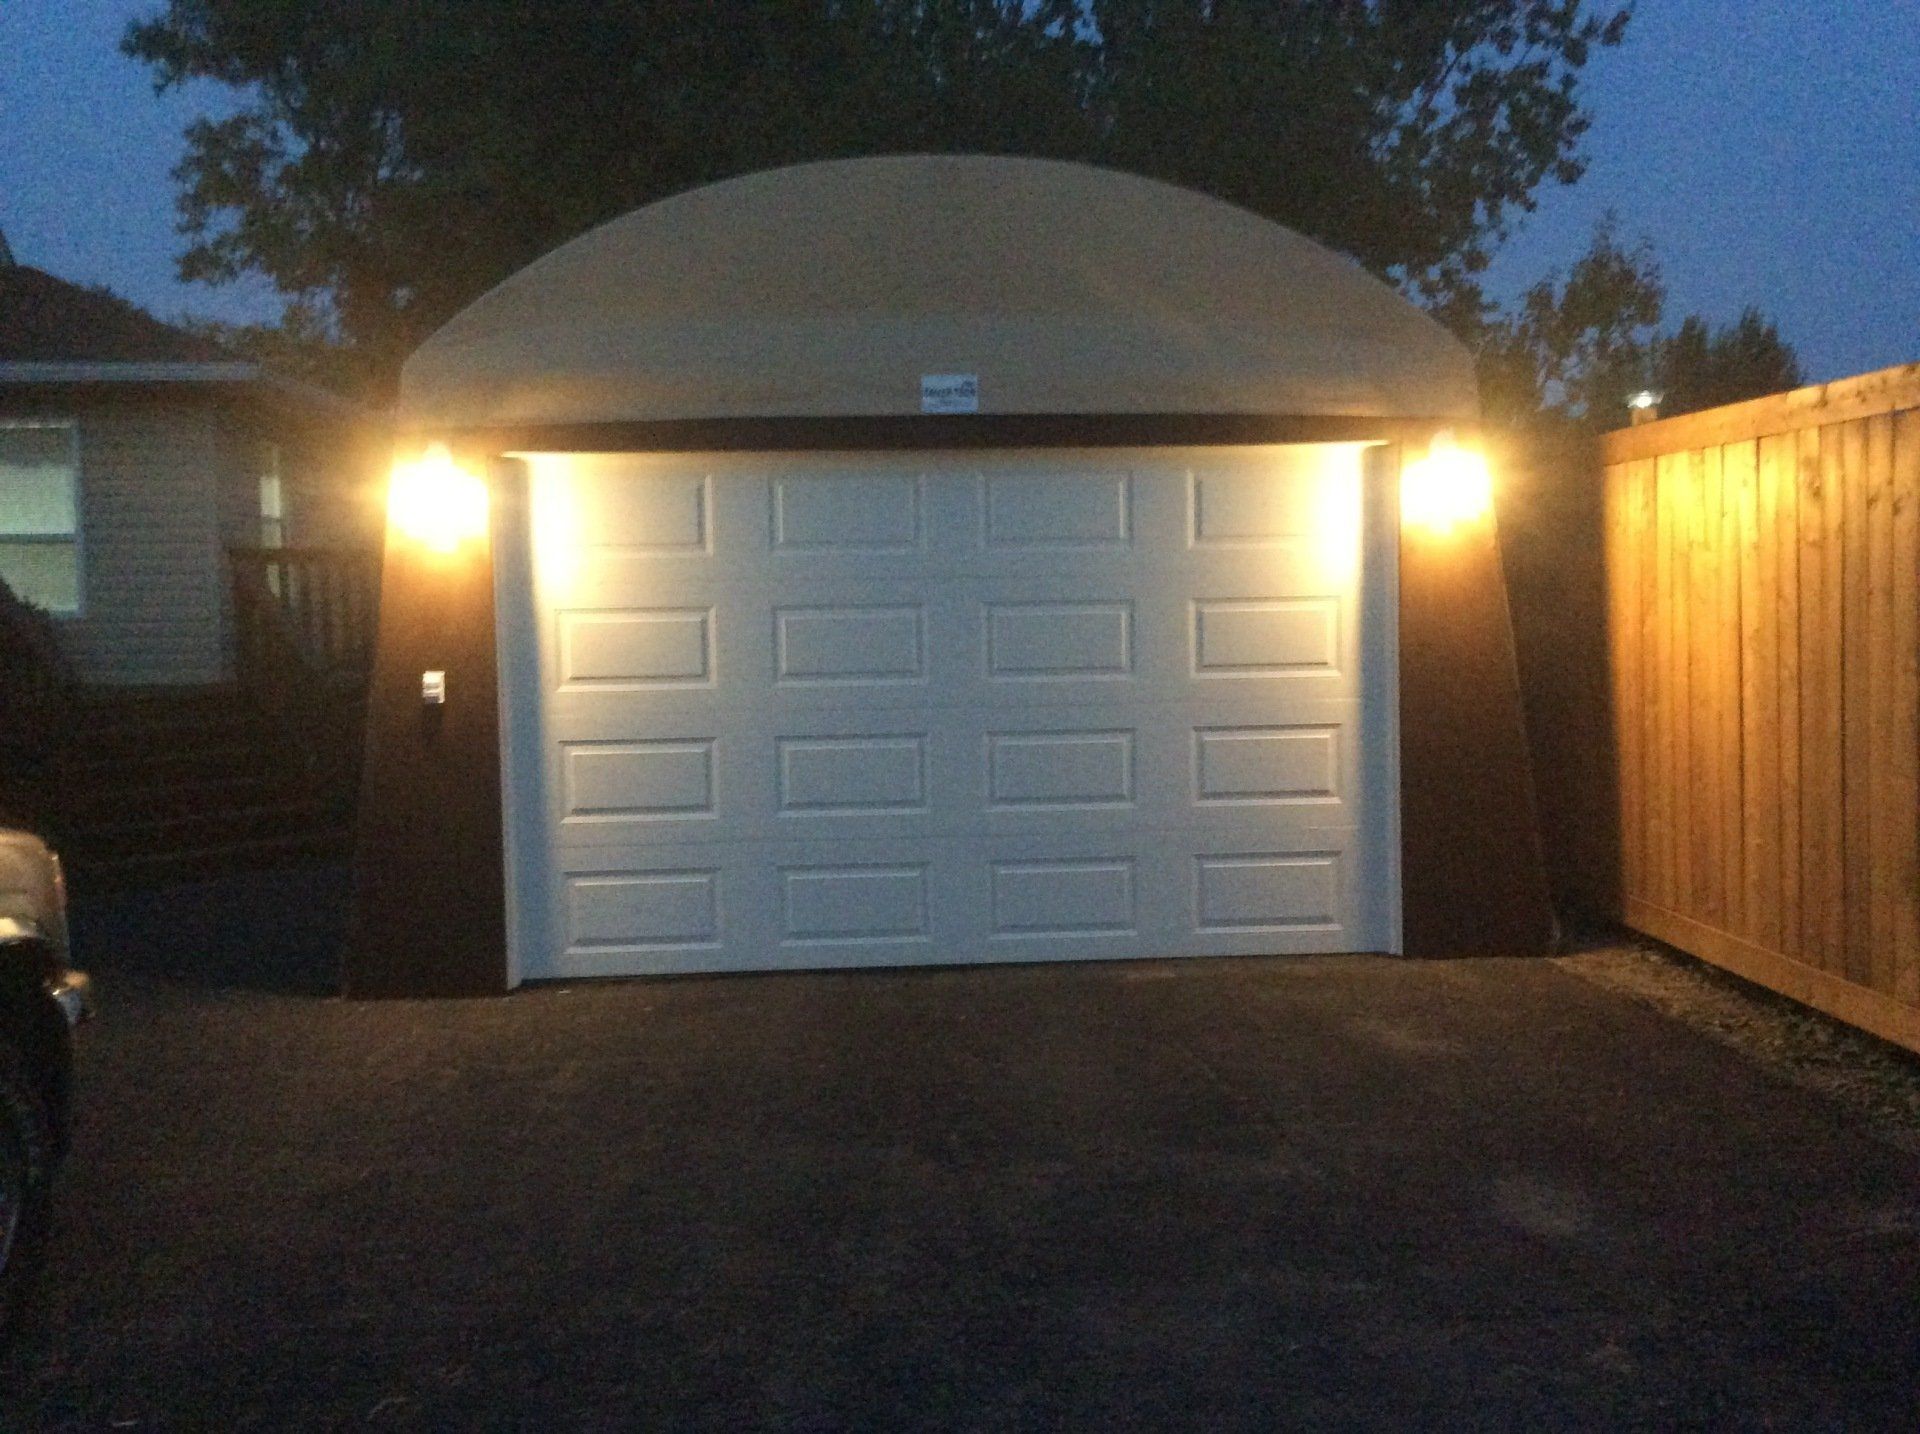 16' x 30' cover-tech reviews pic showing a garage door installed in this portable car shelter